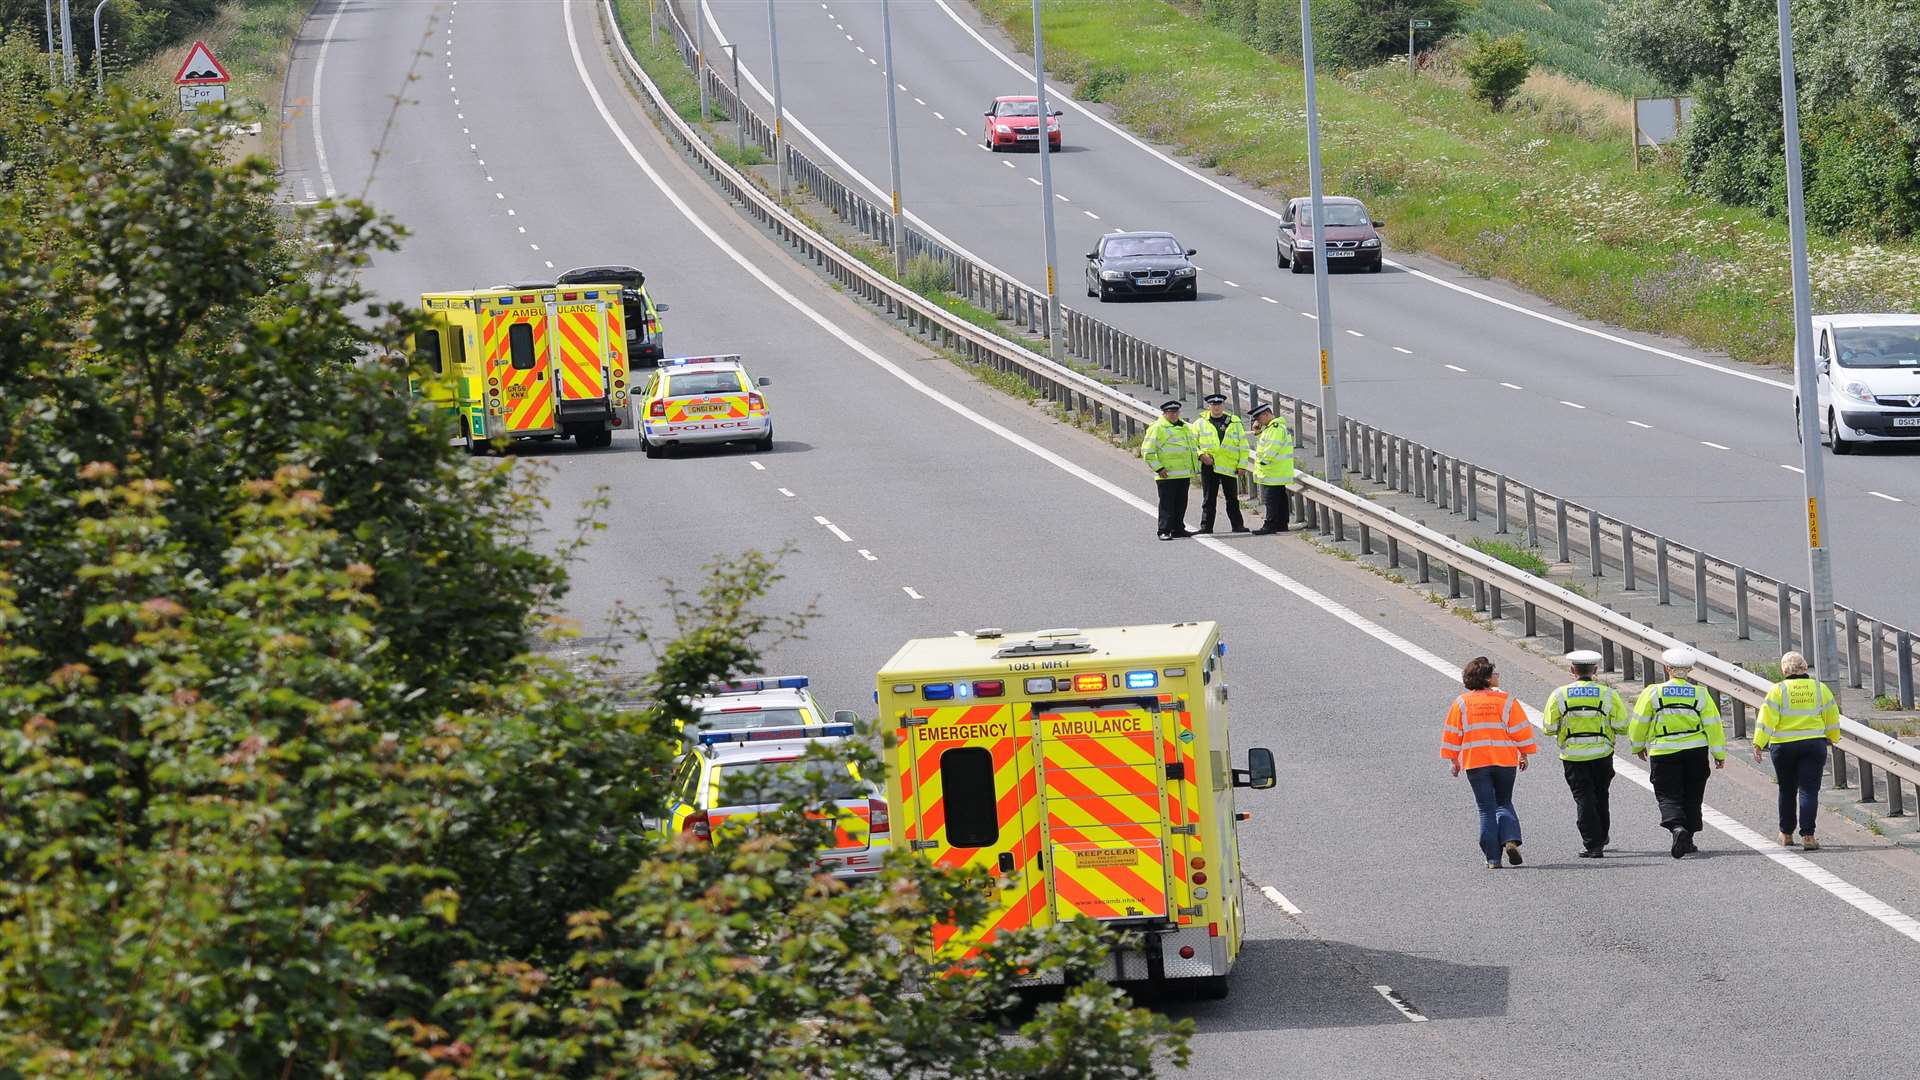 The scene of the fatal crash on the A299 Thanet Way